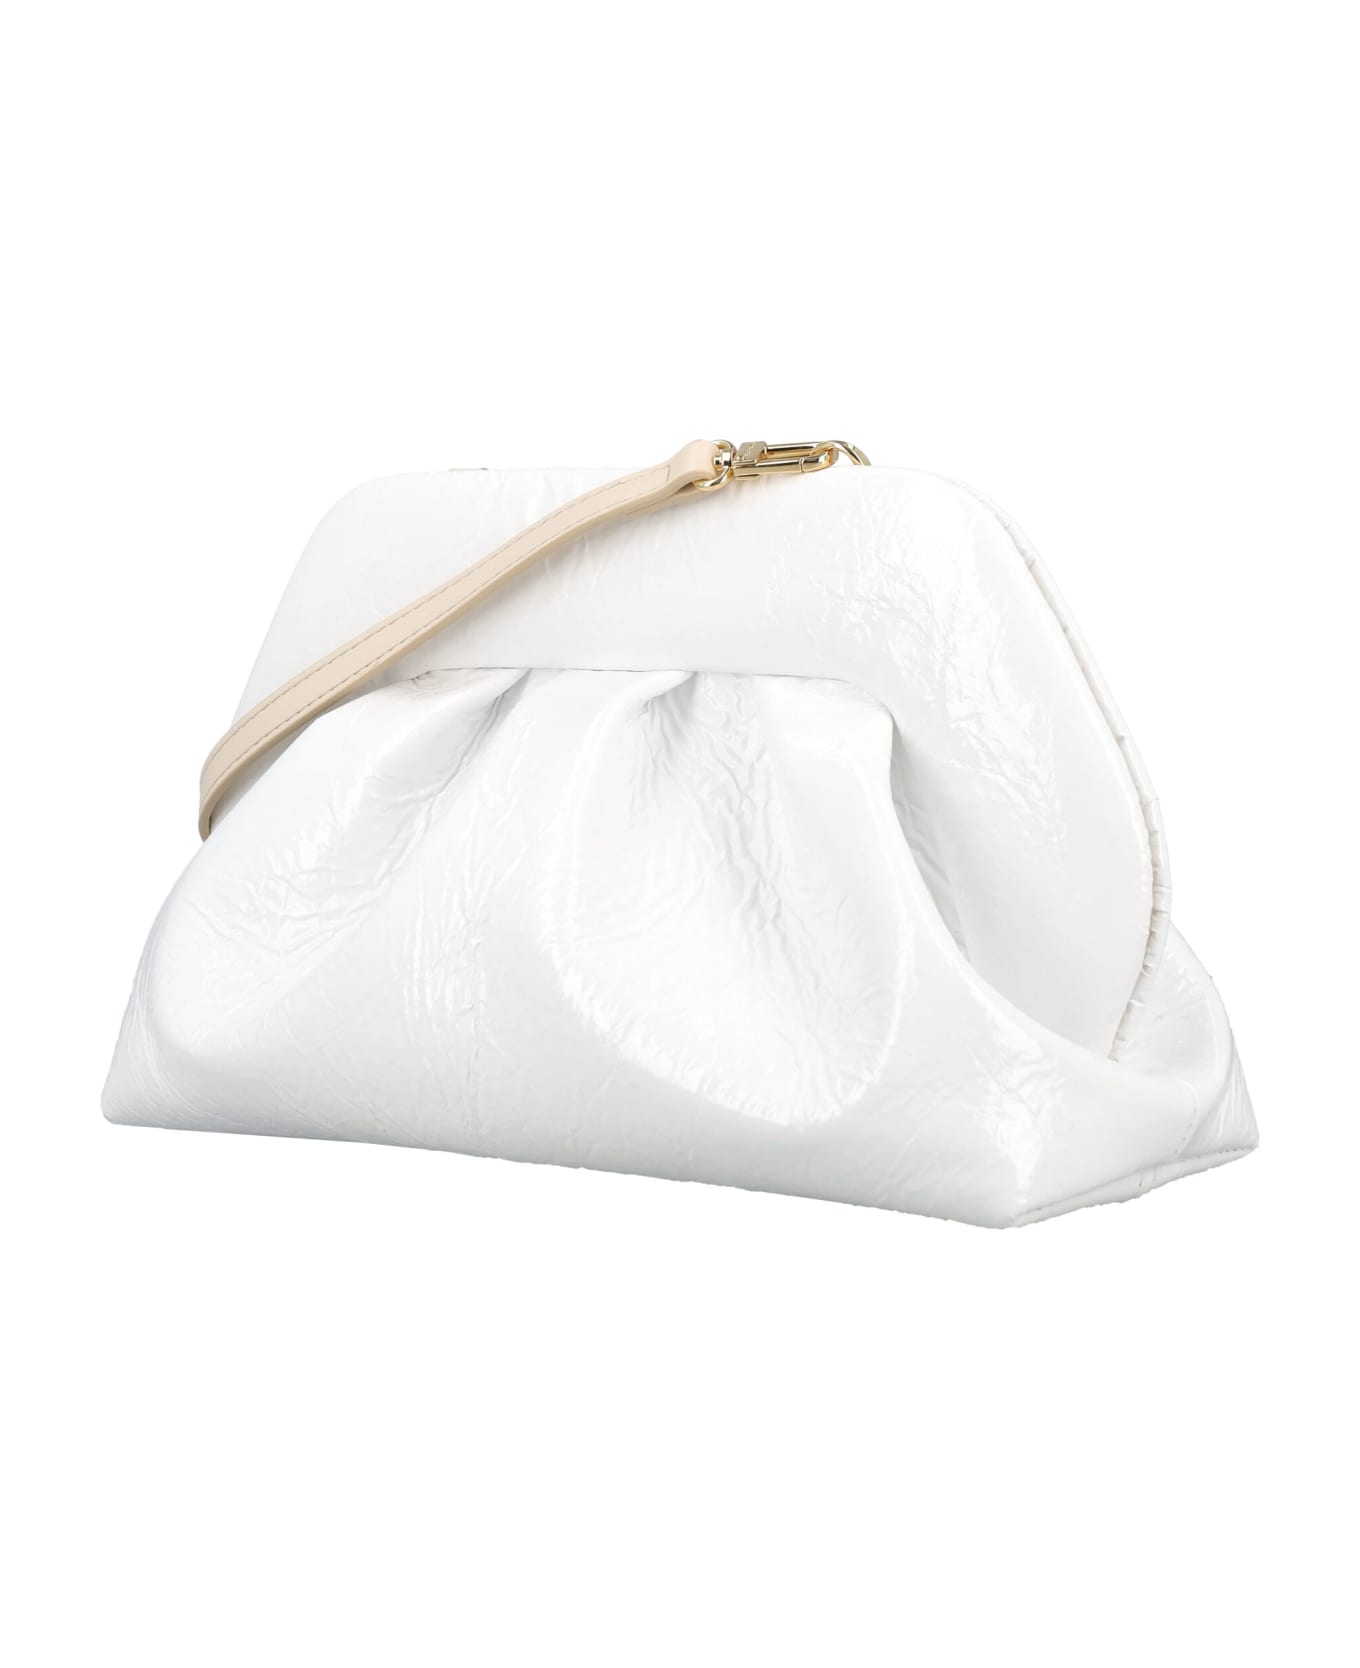 THEMOIRè Tia Clutch Pineapple Leather - SHELL IVORY クラッチバッグ